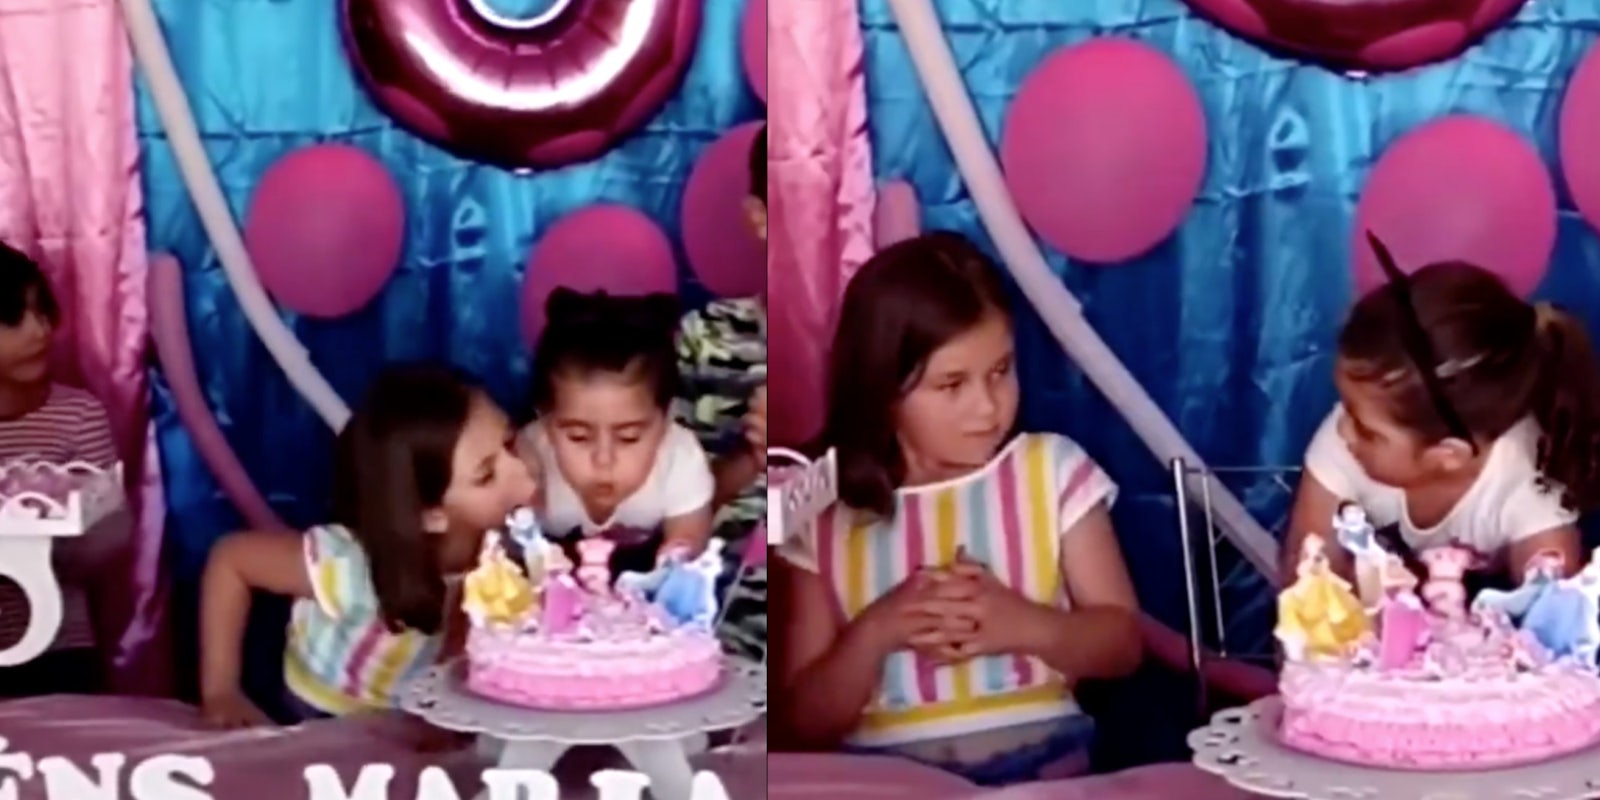 This birthday girl is not having it after a child blew her birthday candles